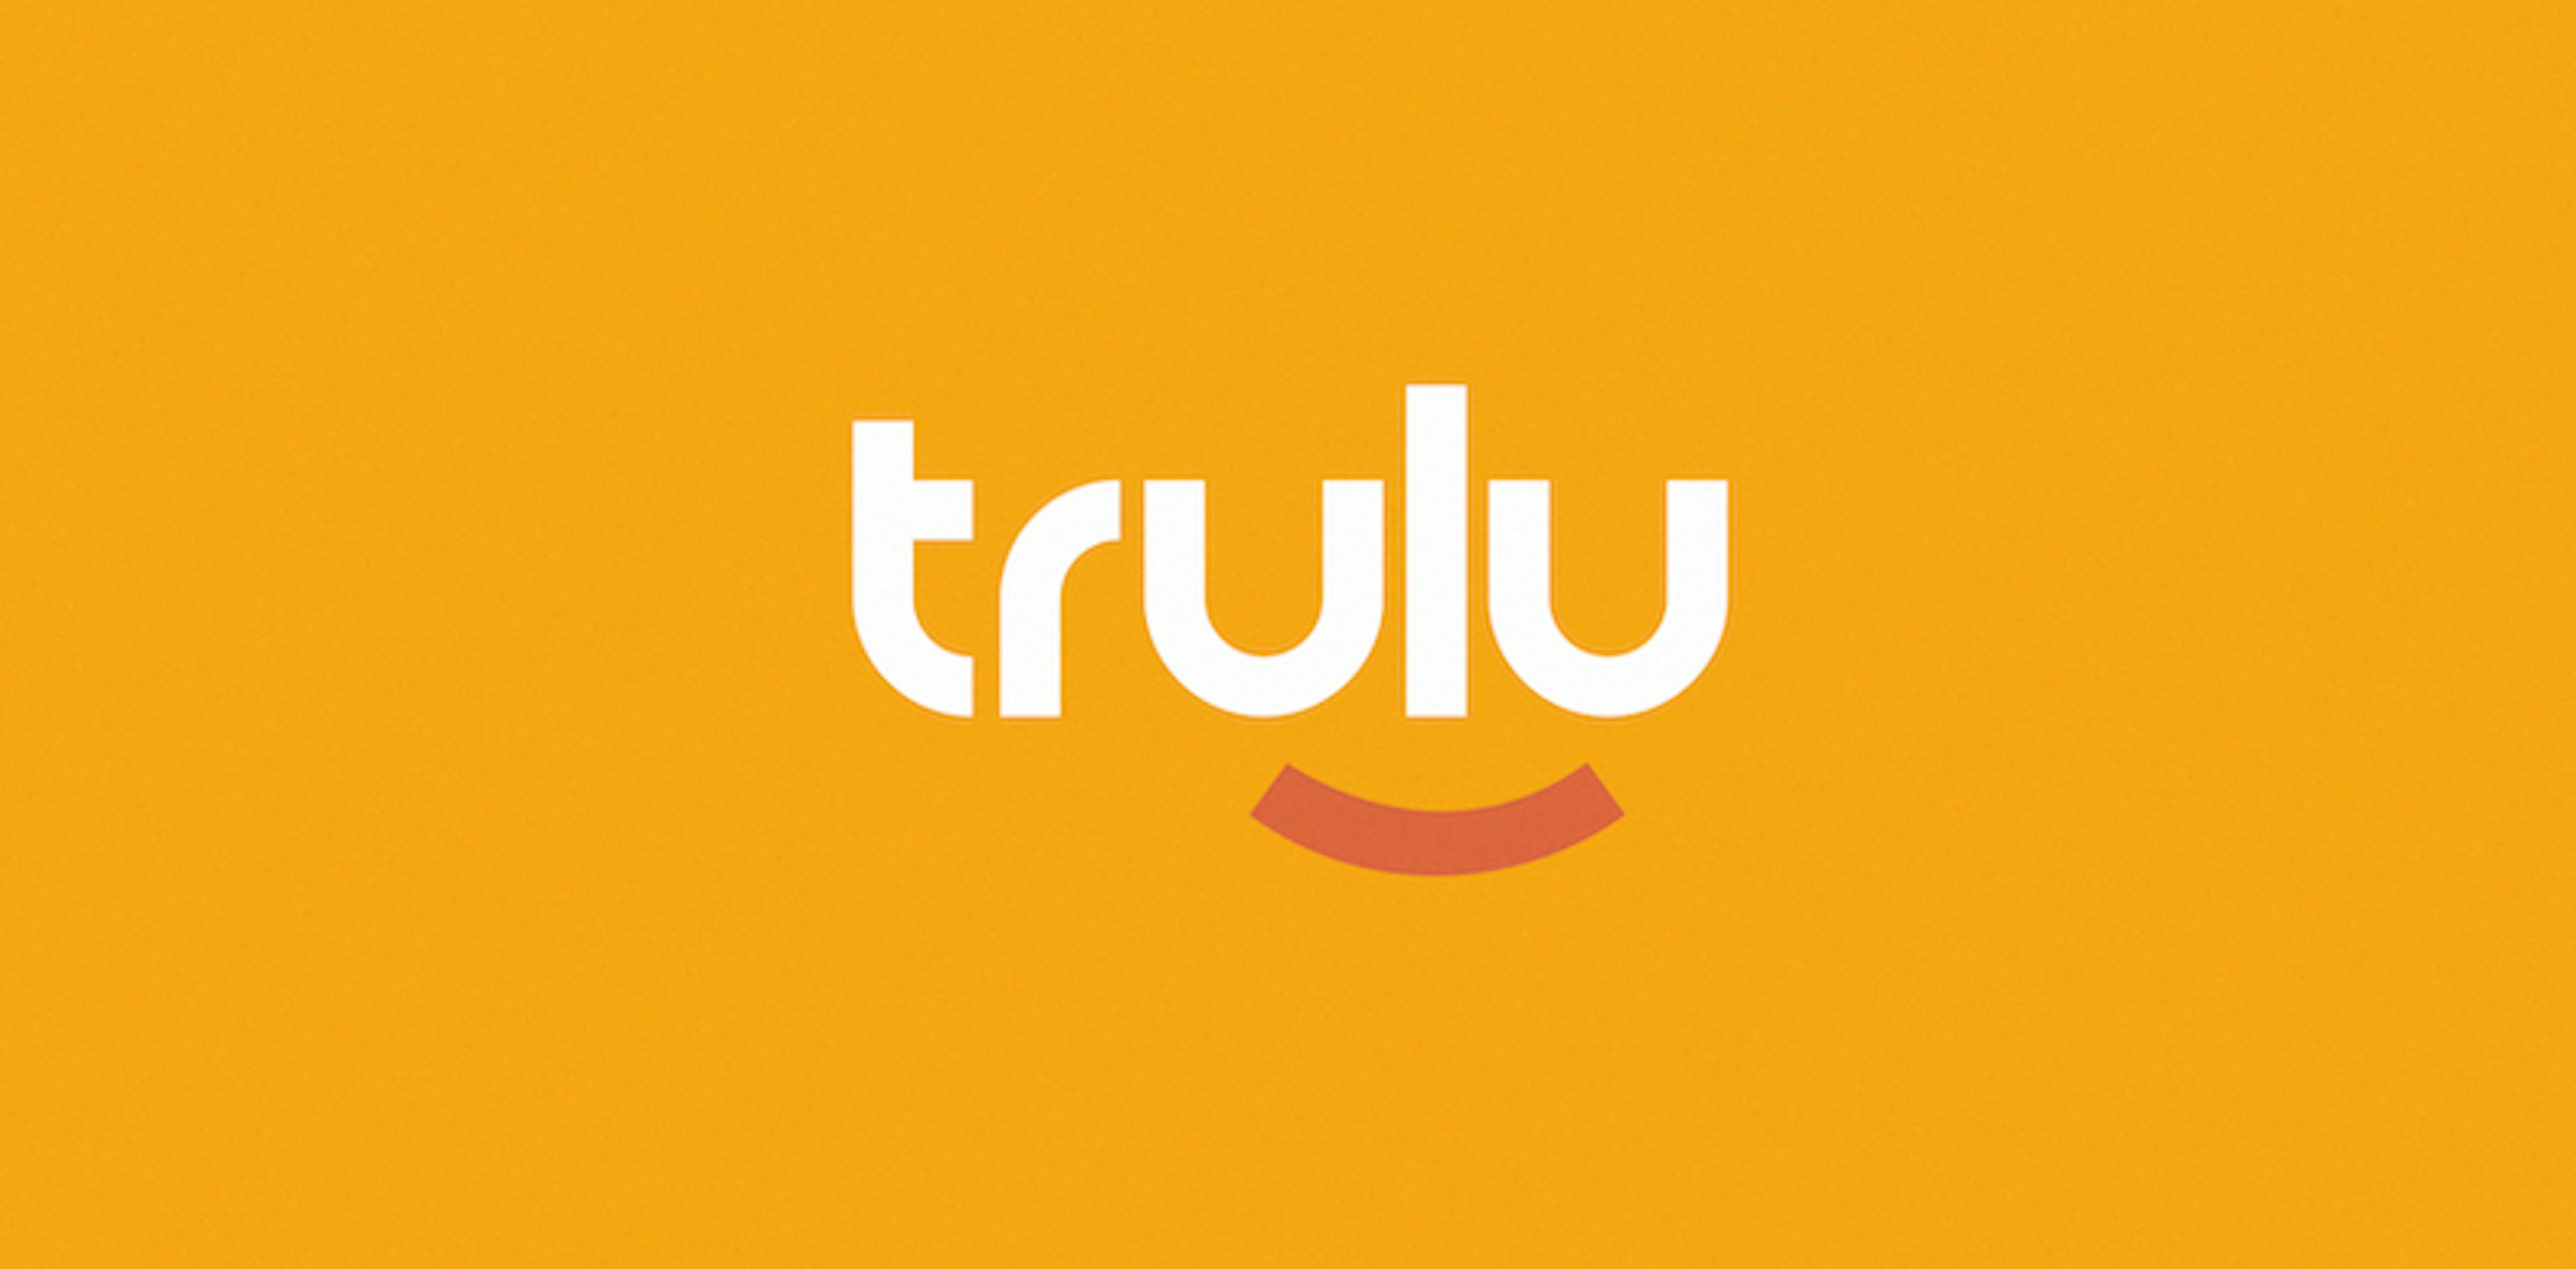 Trulu brand guidelines logo options on yellow and white background